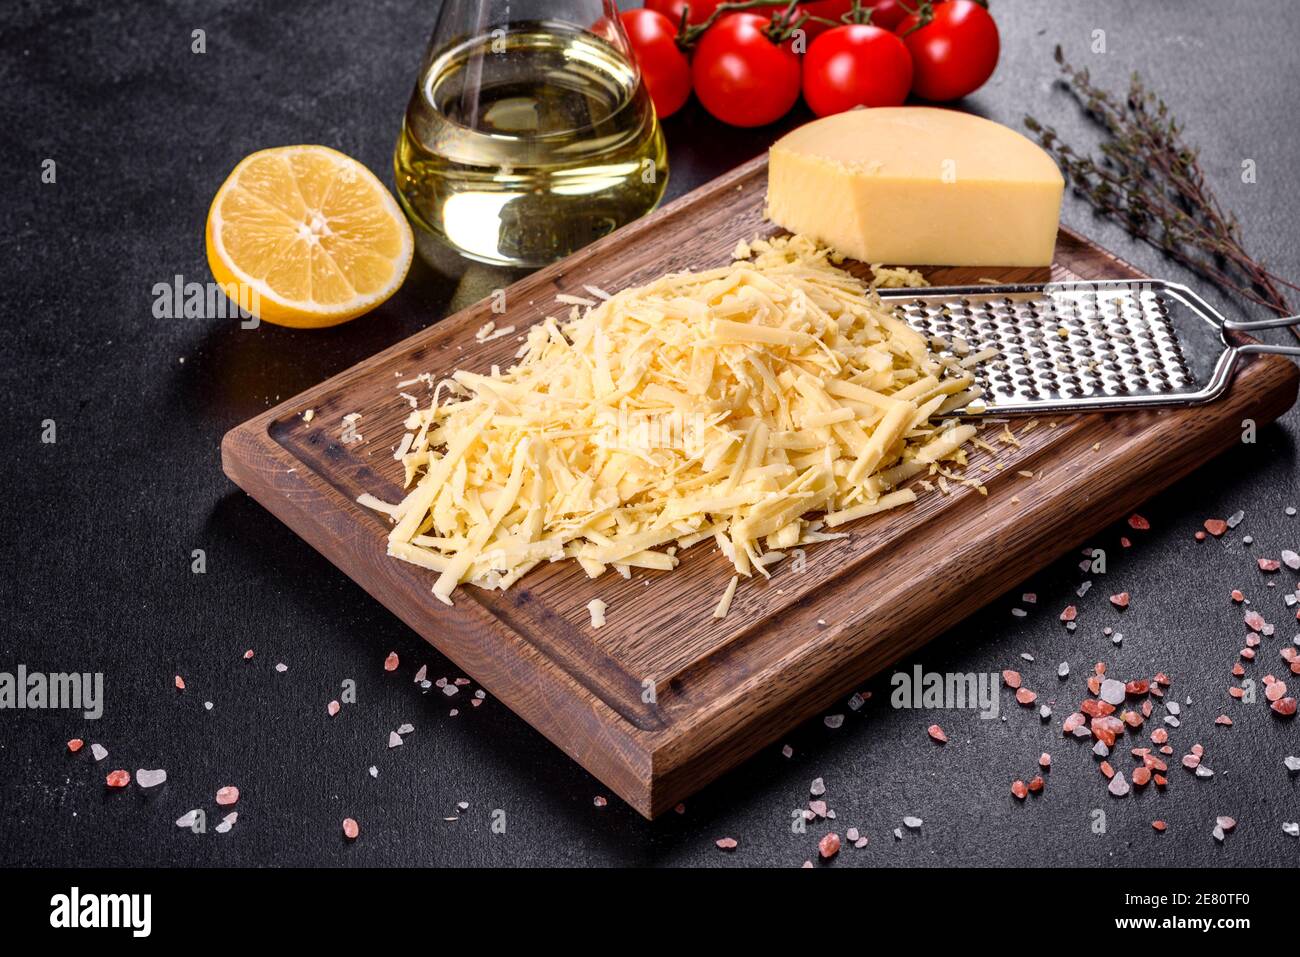 Italian hard cheese with grater on wooden background Stock Photo - Alamy